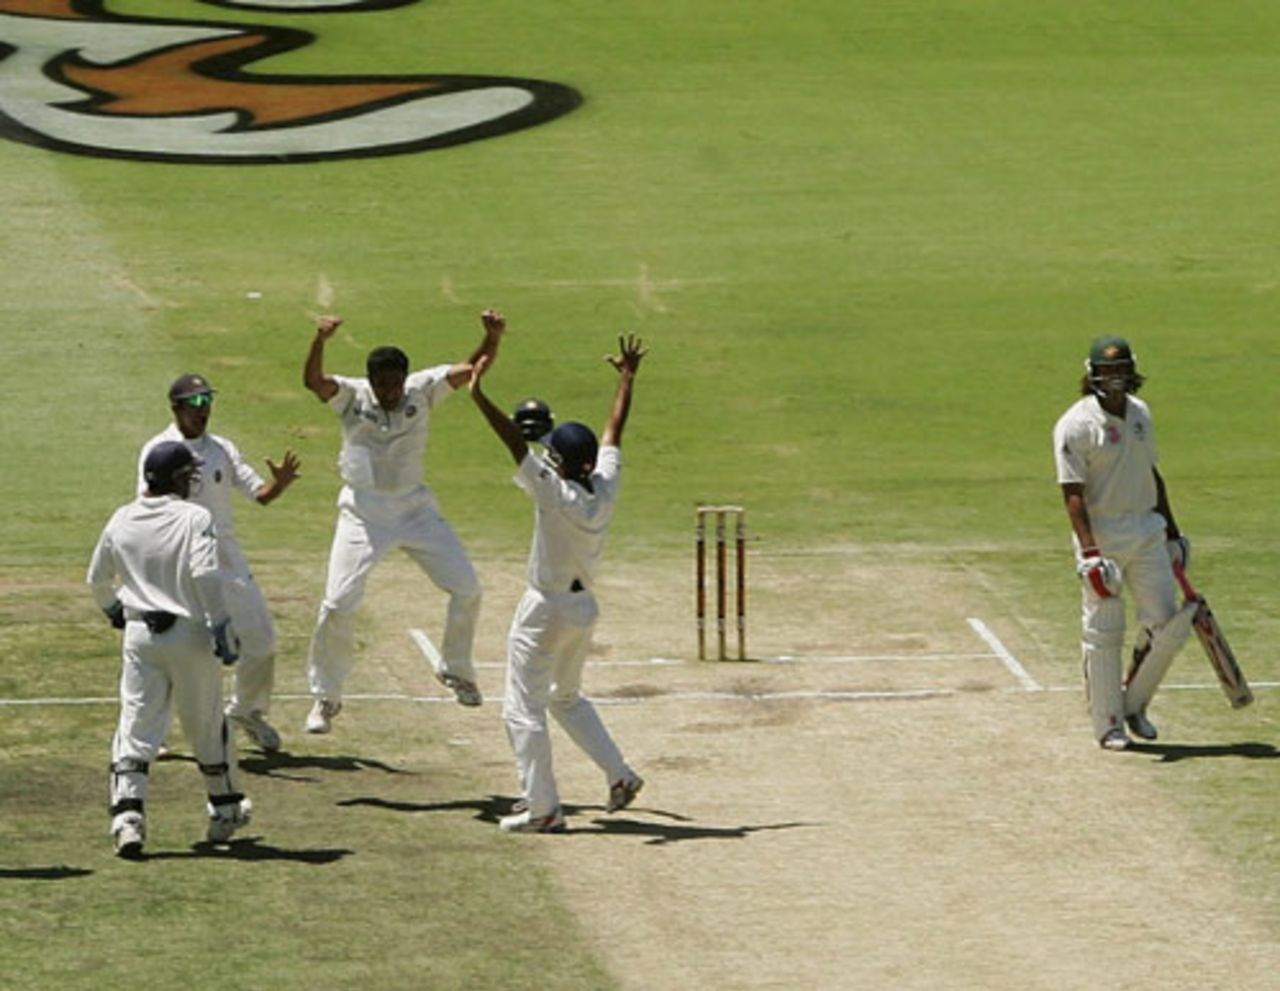 Anil Kumble is clearly pleased after getting Andrew Symonds out , Australia v India, 3rd Test, Perth, 4th day, January 19, 2008